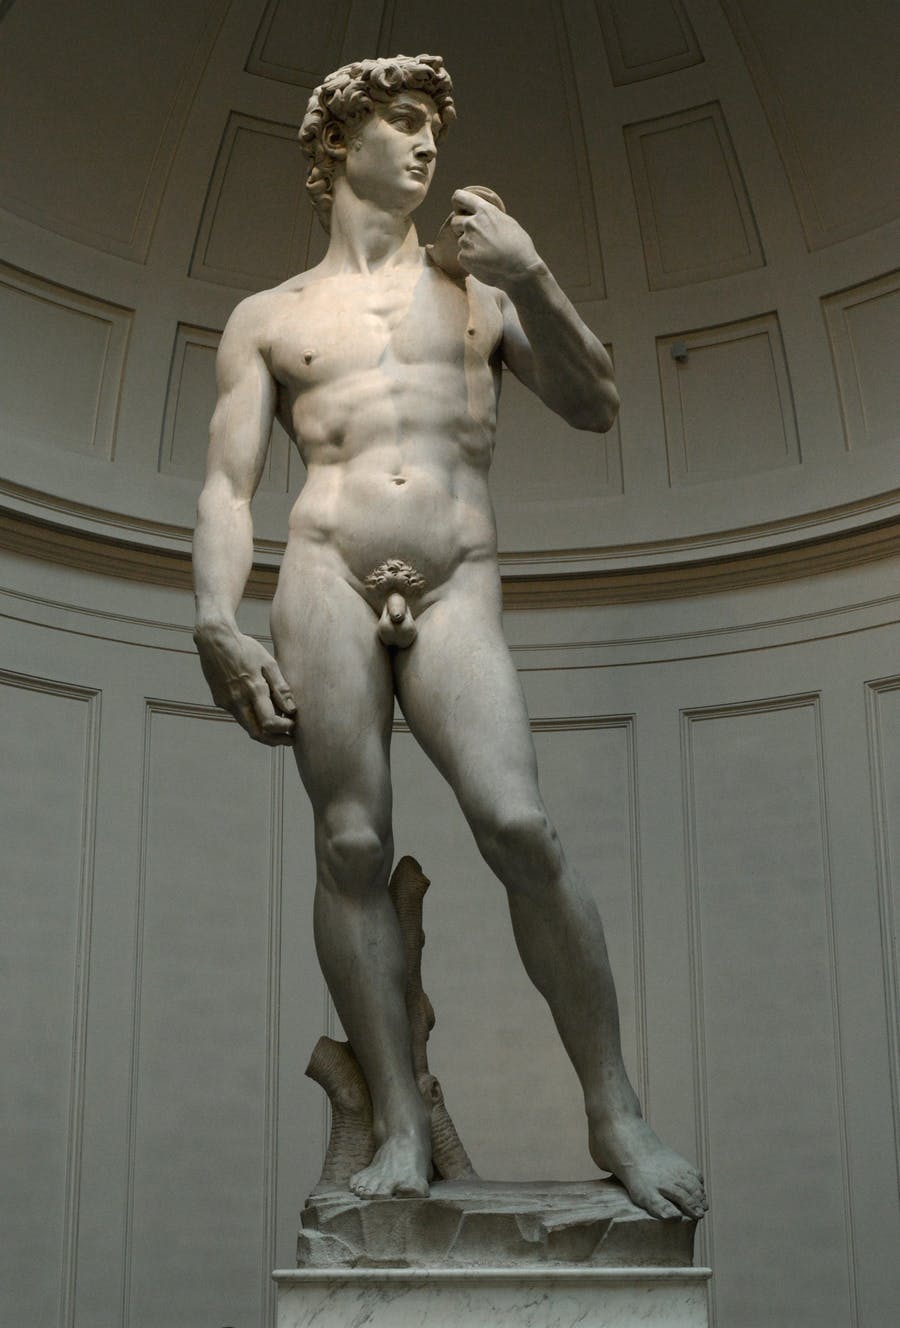 Michelangelo Buonarroti, David, 1501-1504, marble in the round, 517 cm × 199 cm, Accademia Gallery, Florence. Photo by Alex Ghizila